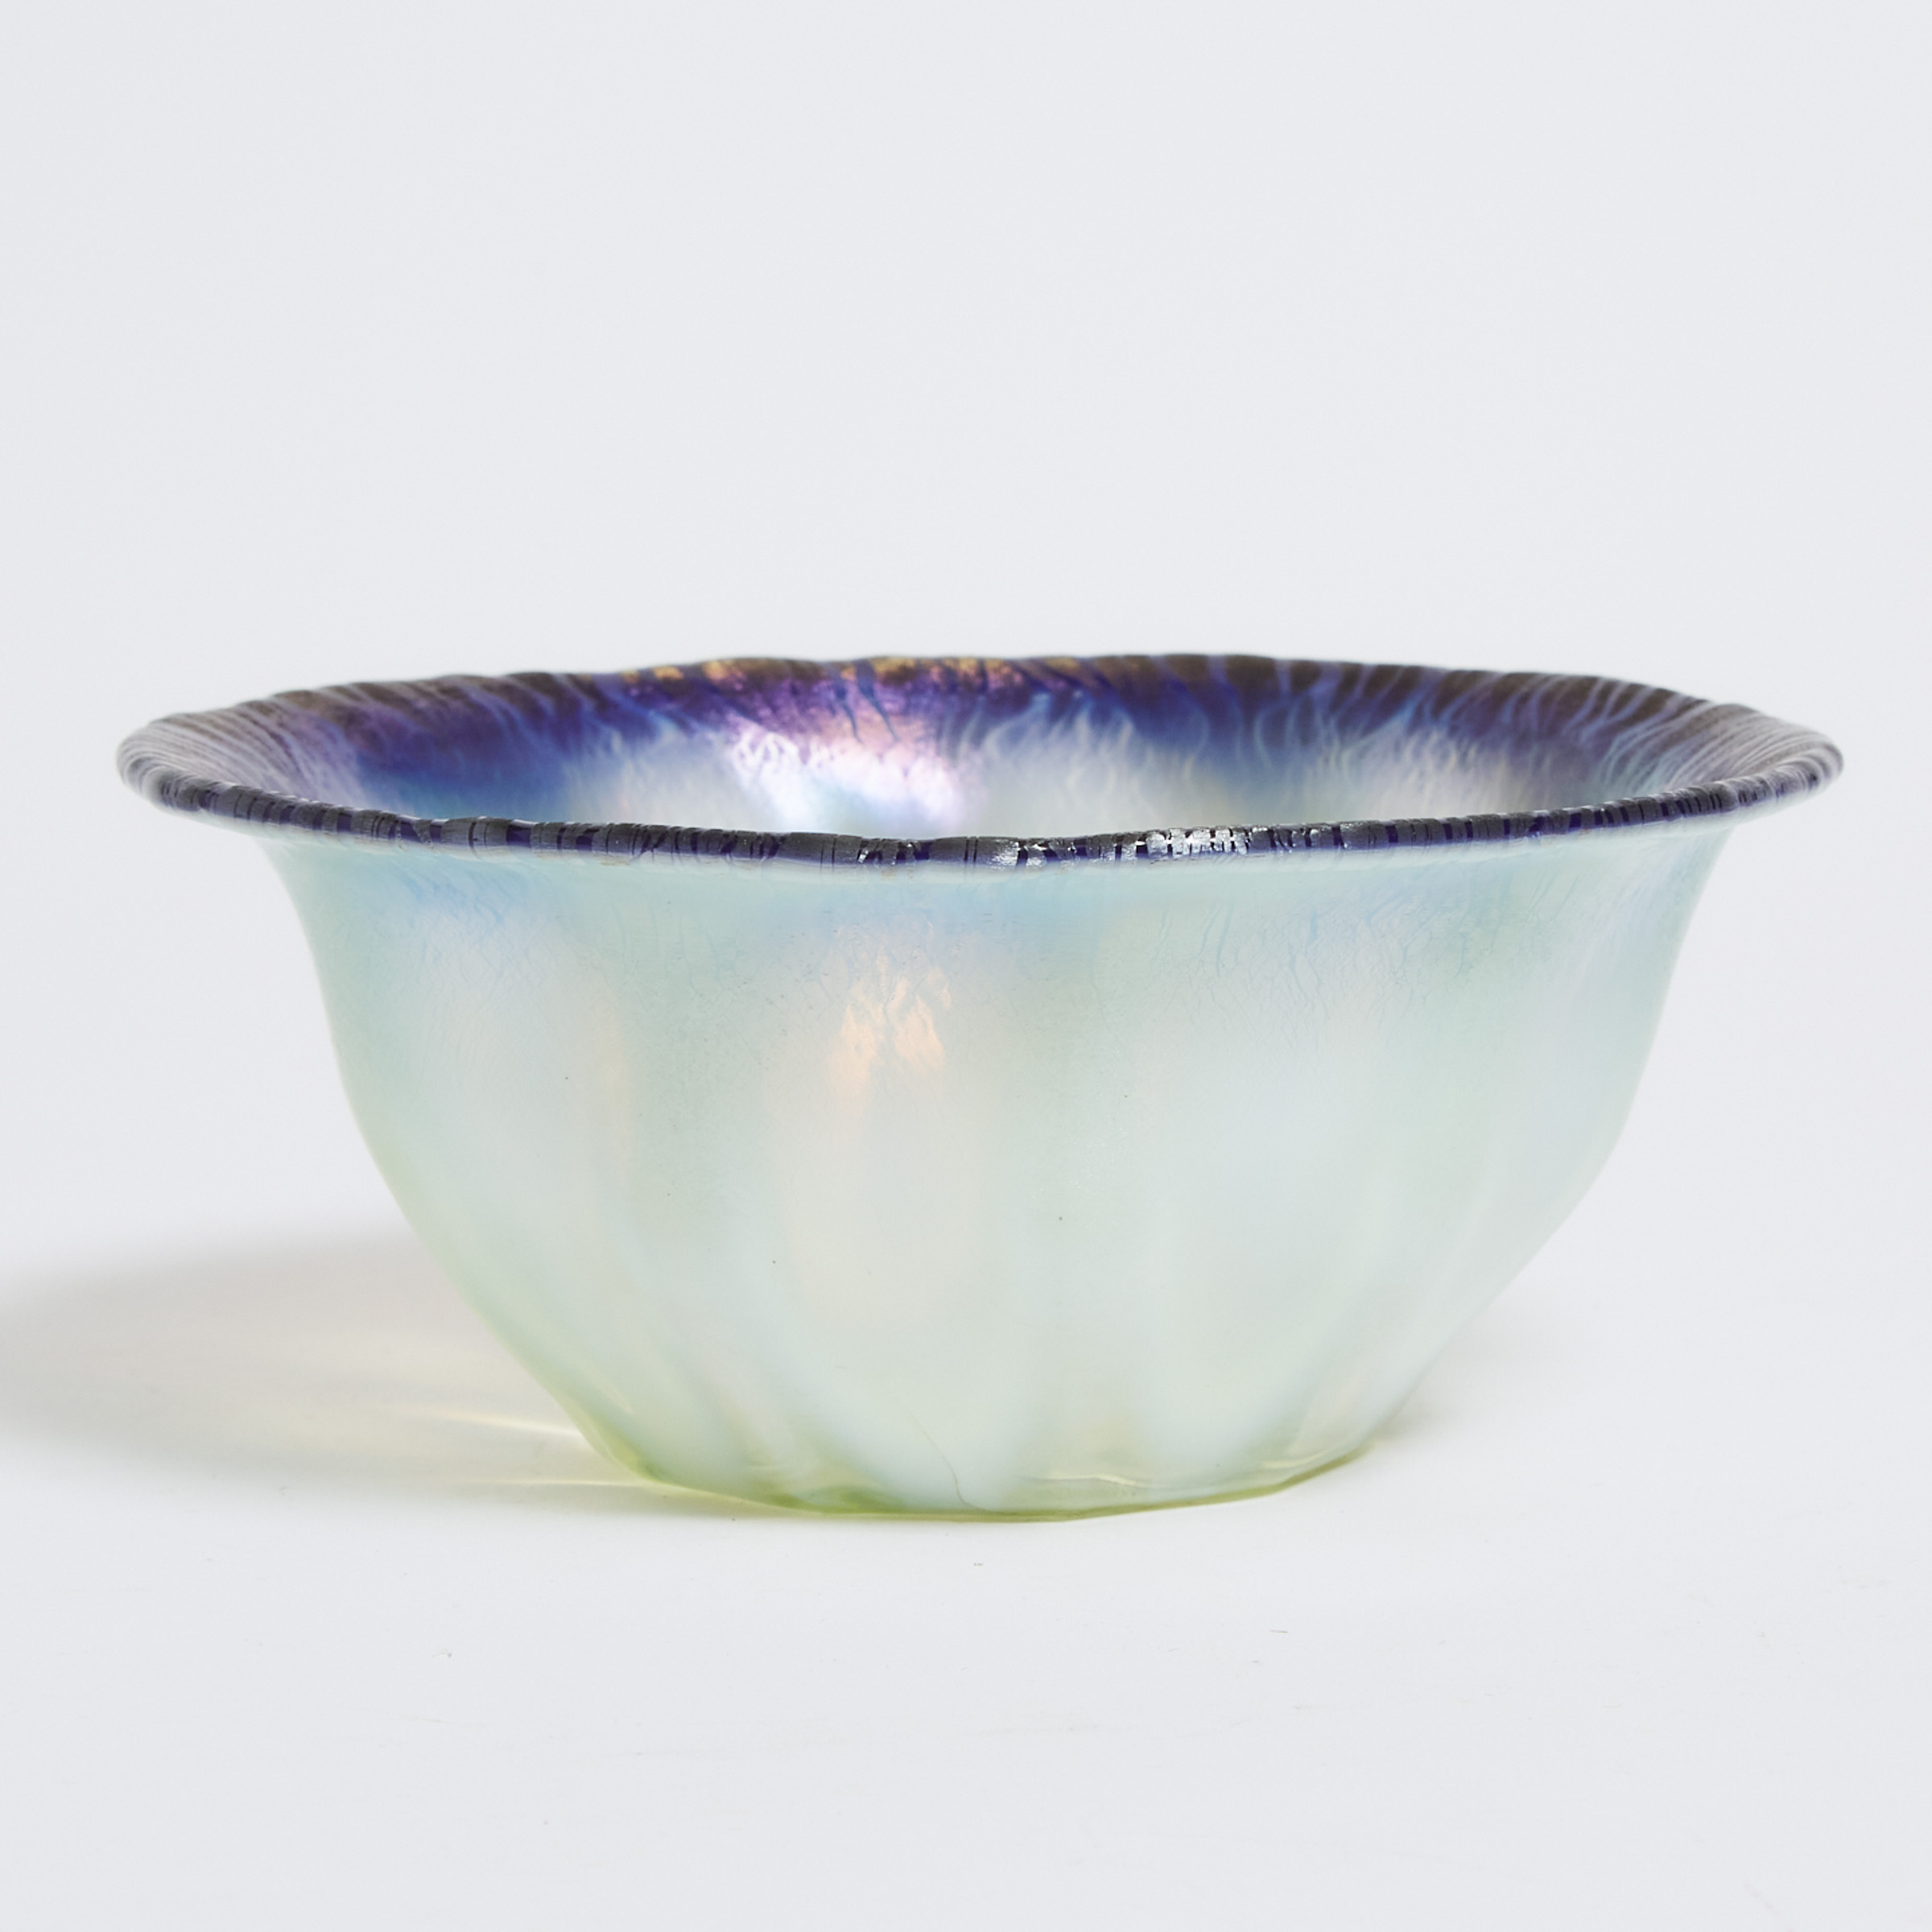 Tiffany 'Favrile' Iridescent Glass Bowl, early 20th century